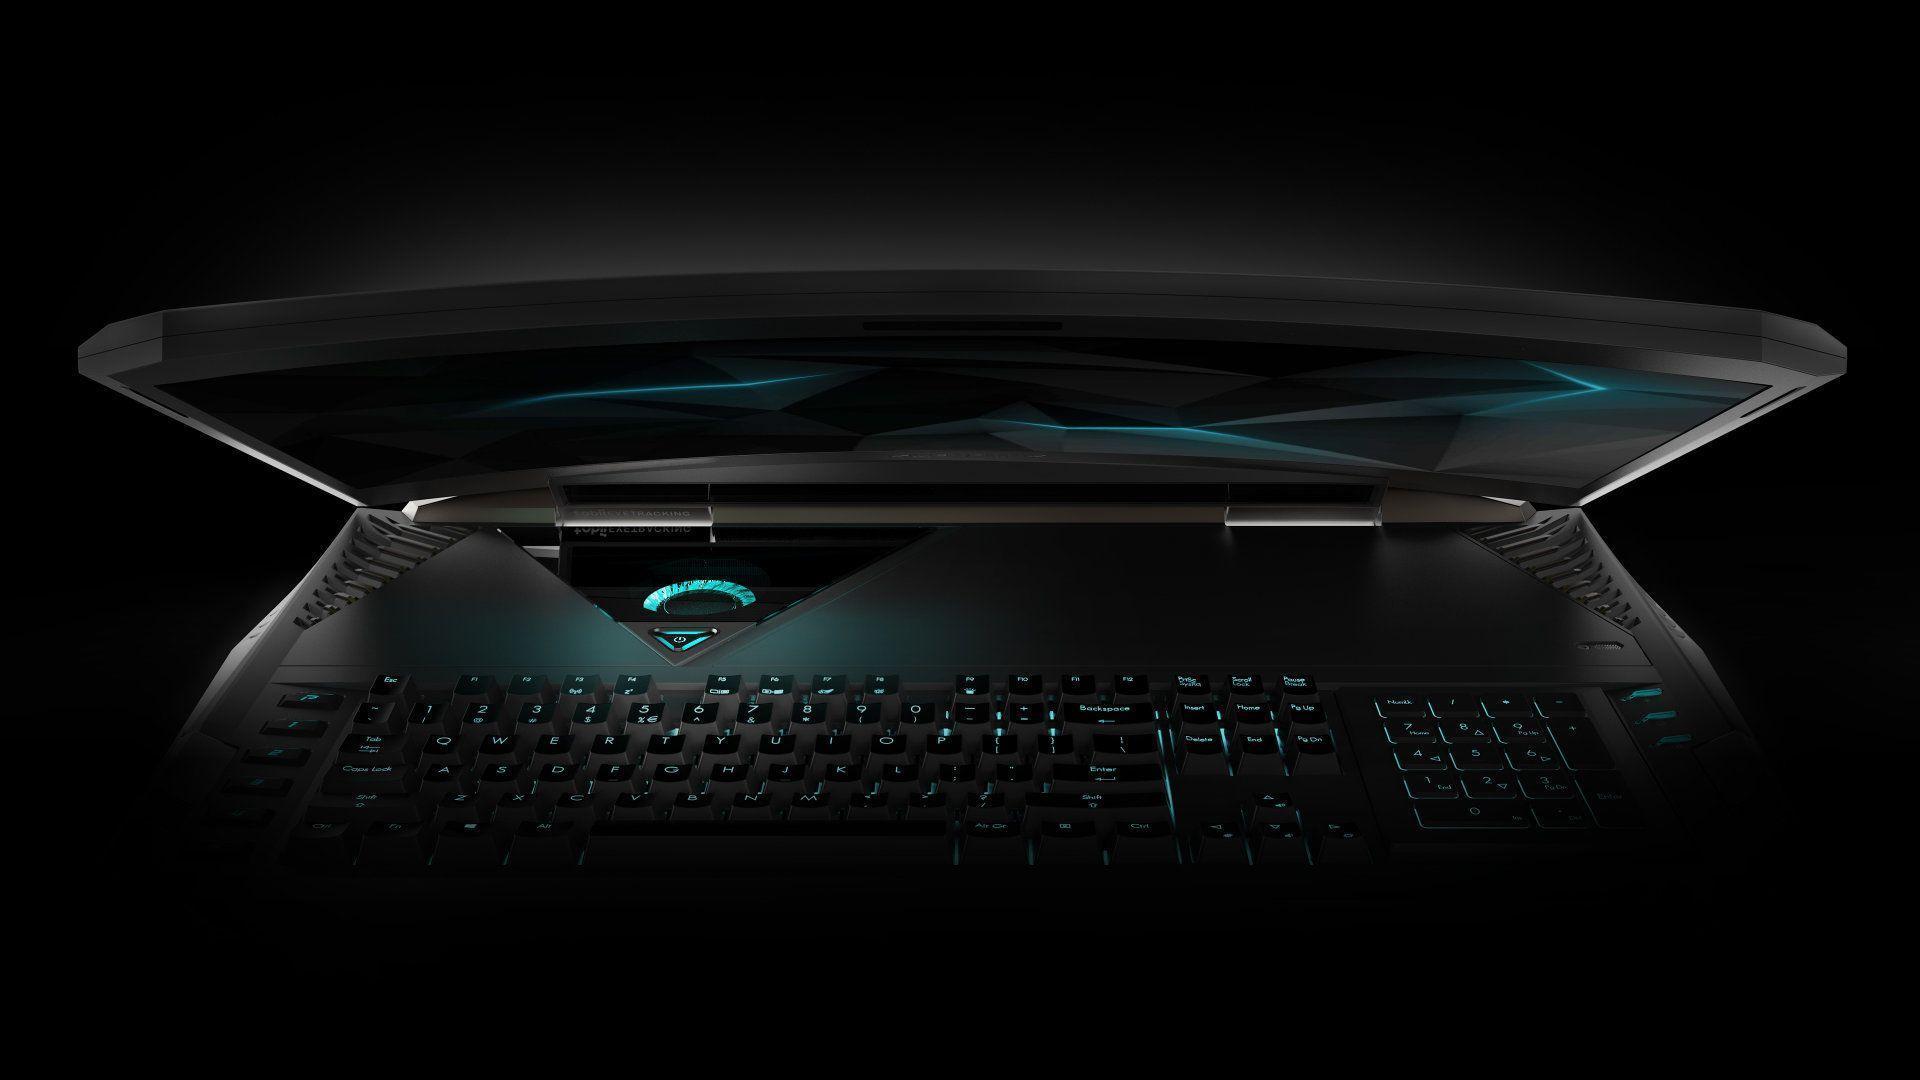 Acer's new Predator 21 X World's First Curved Screen Notebook